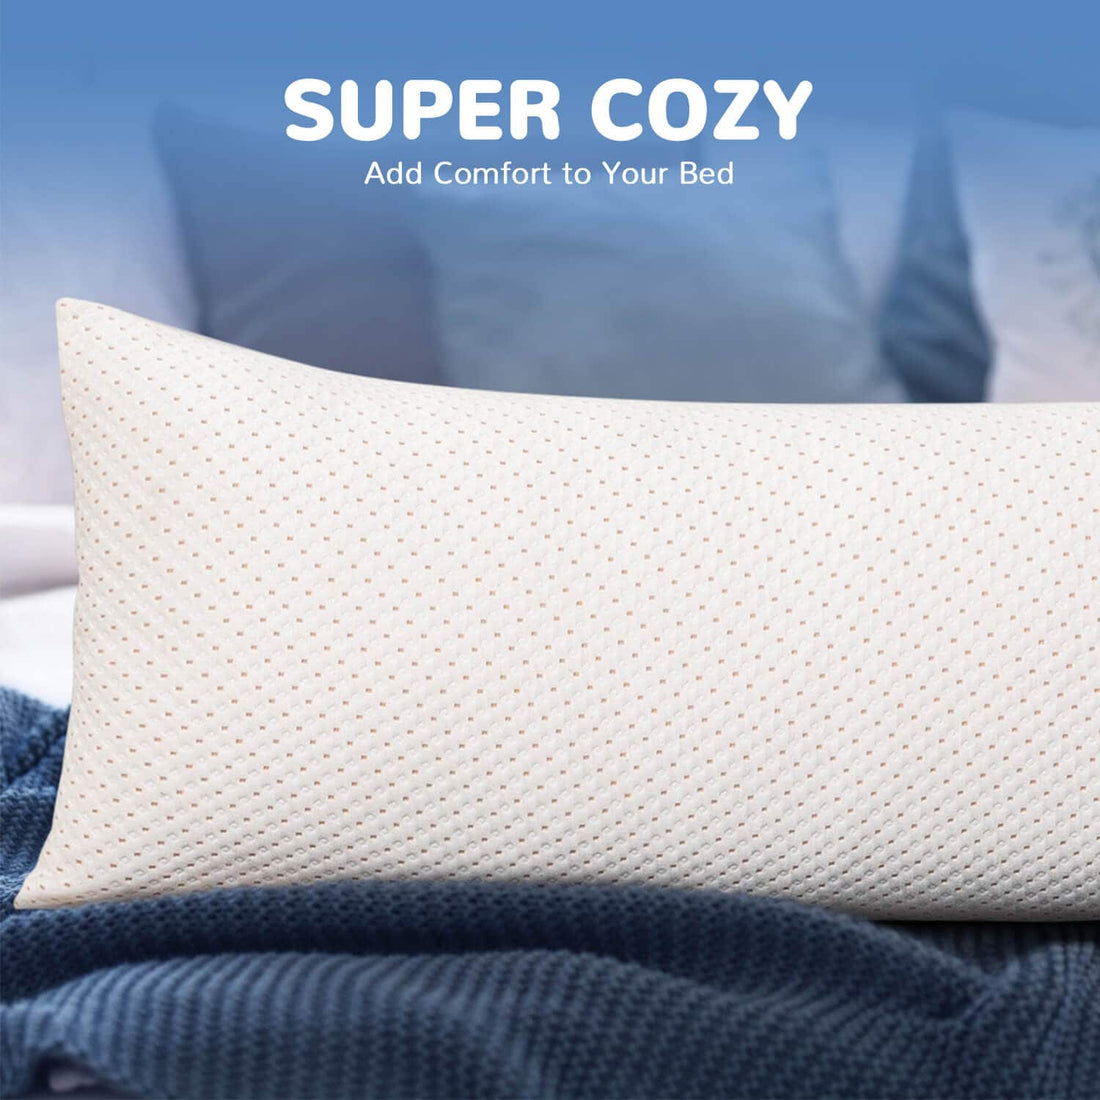 Full Body Pillow for Adults - Shredded Memory Foam &amp; Zippered Cooling Bamboo Cover - Long Pillow for Sleeping - Bed Pillows for Side Sleeper